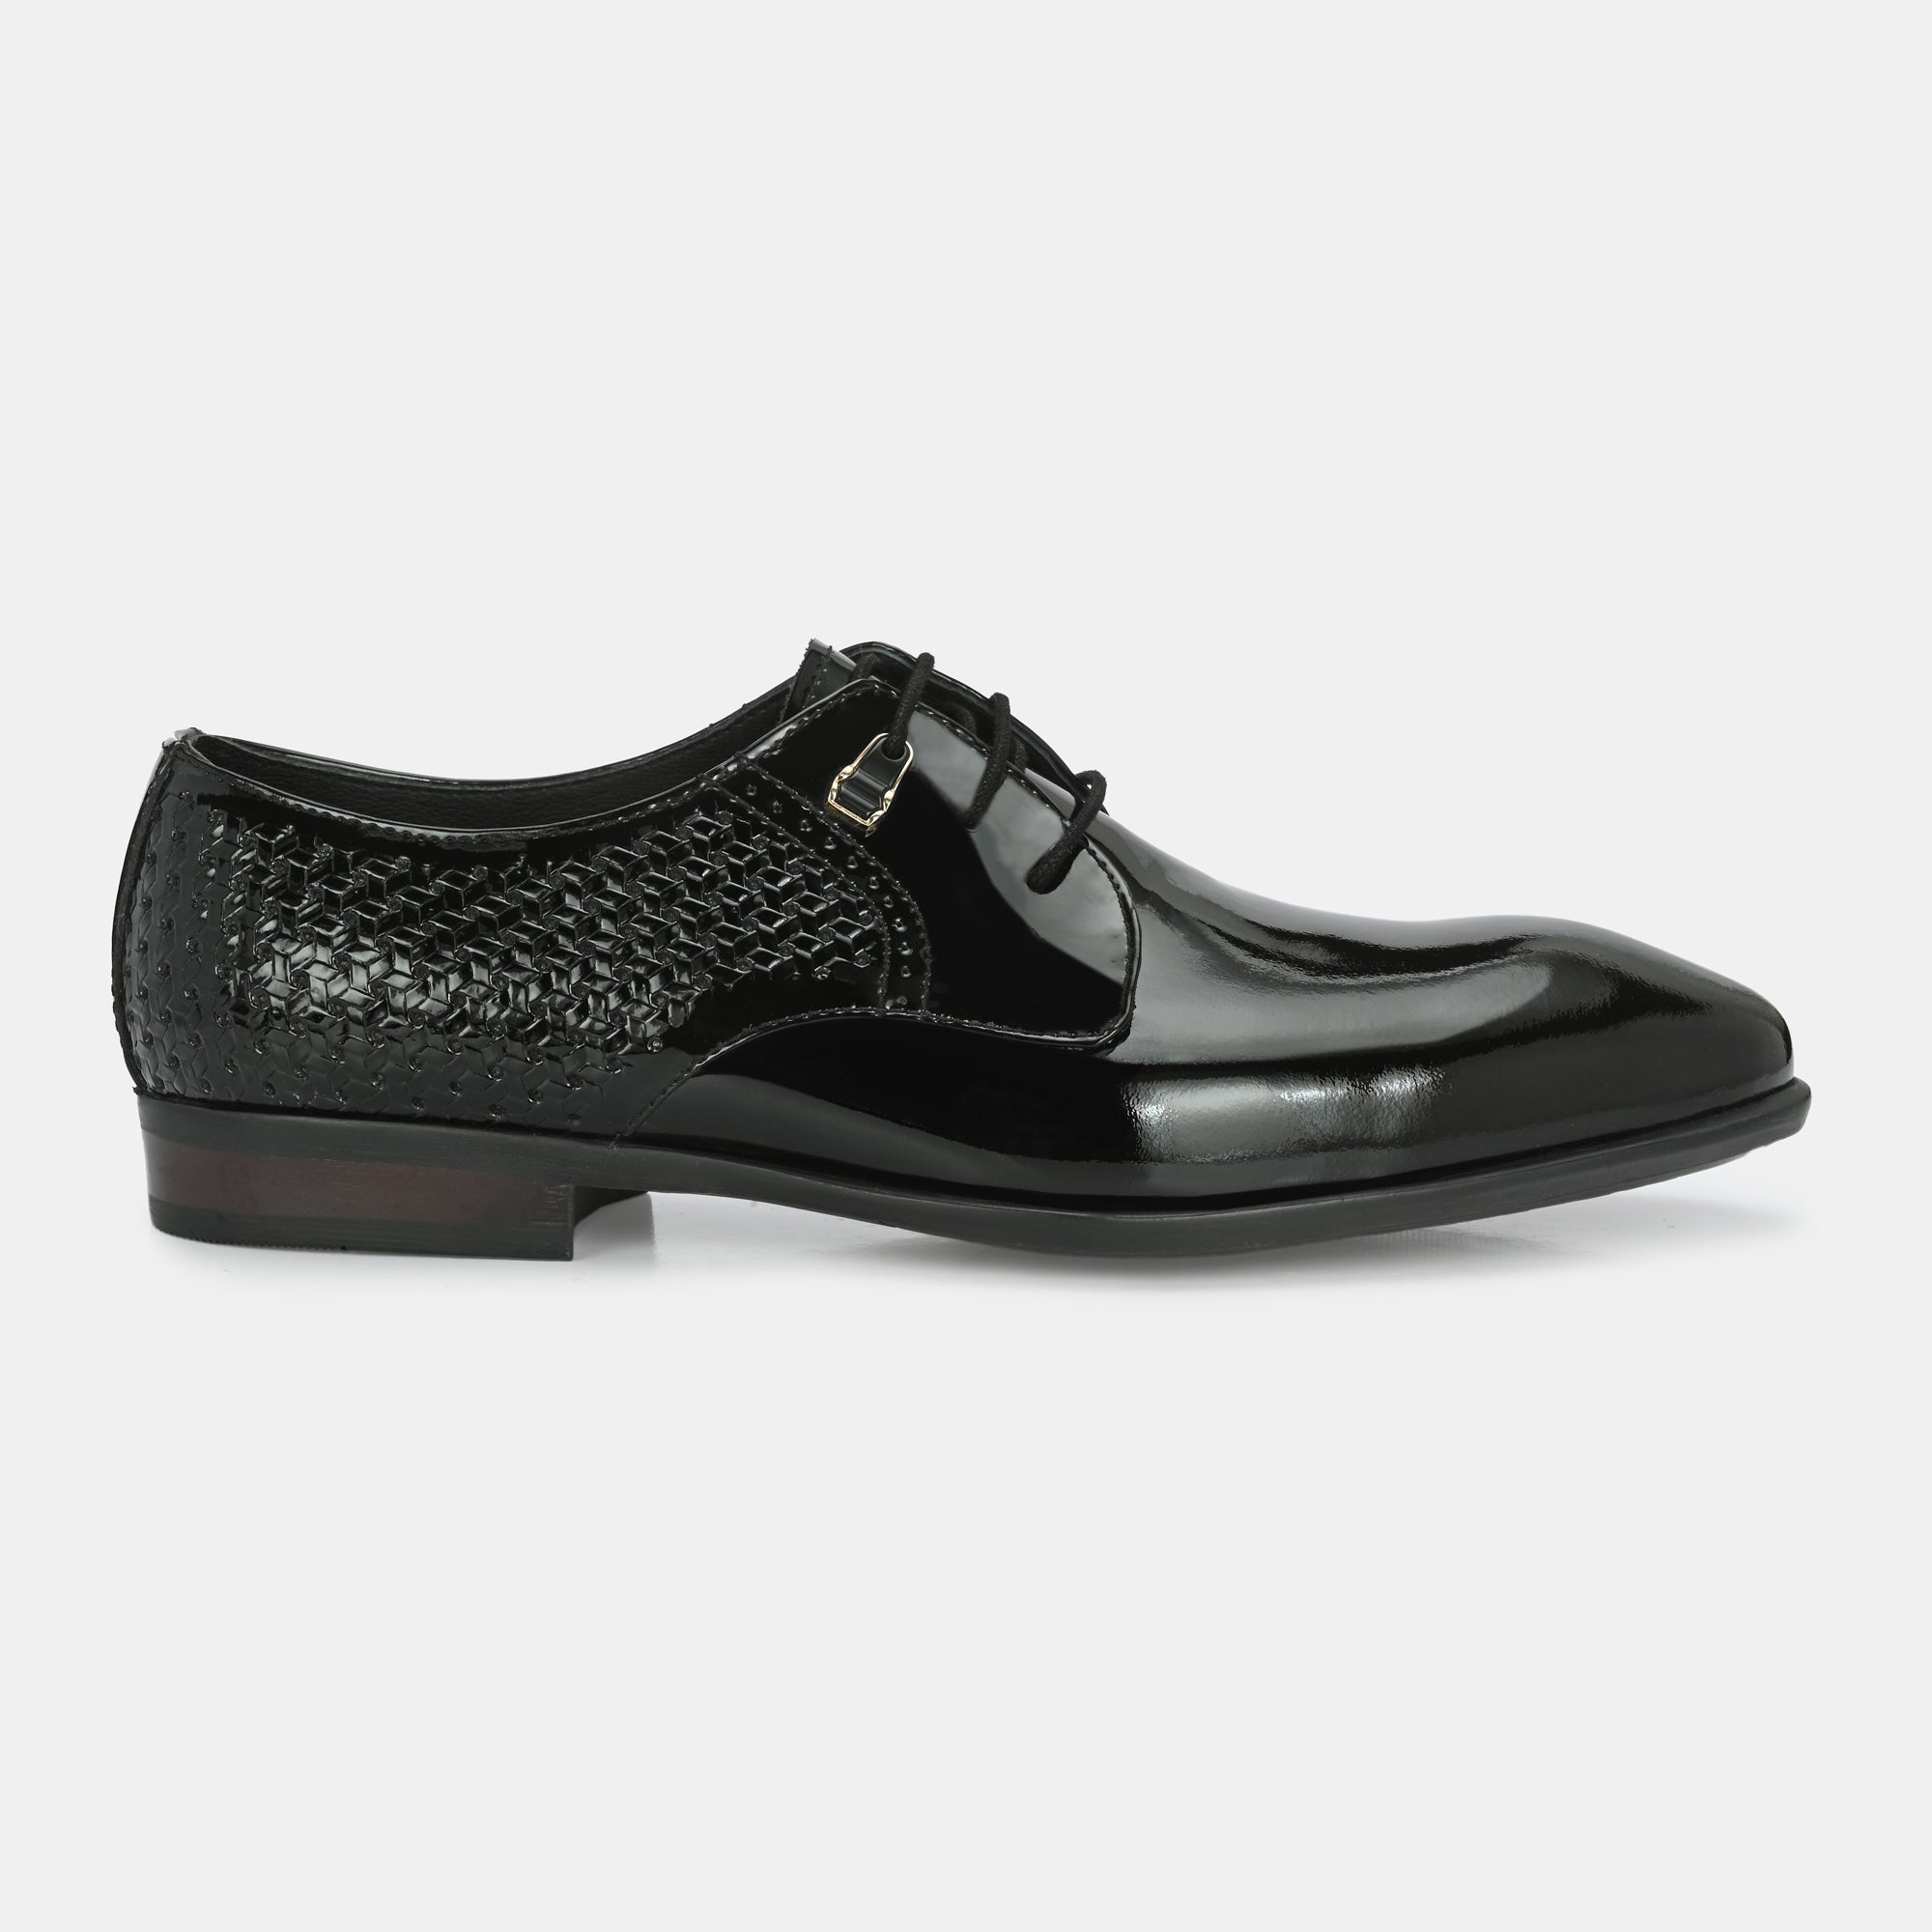 Patent Black Perforated Lace-Up Shoes by Lafattio